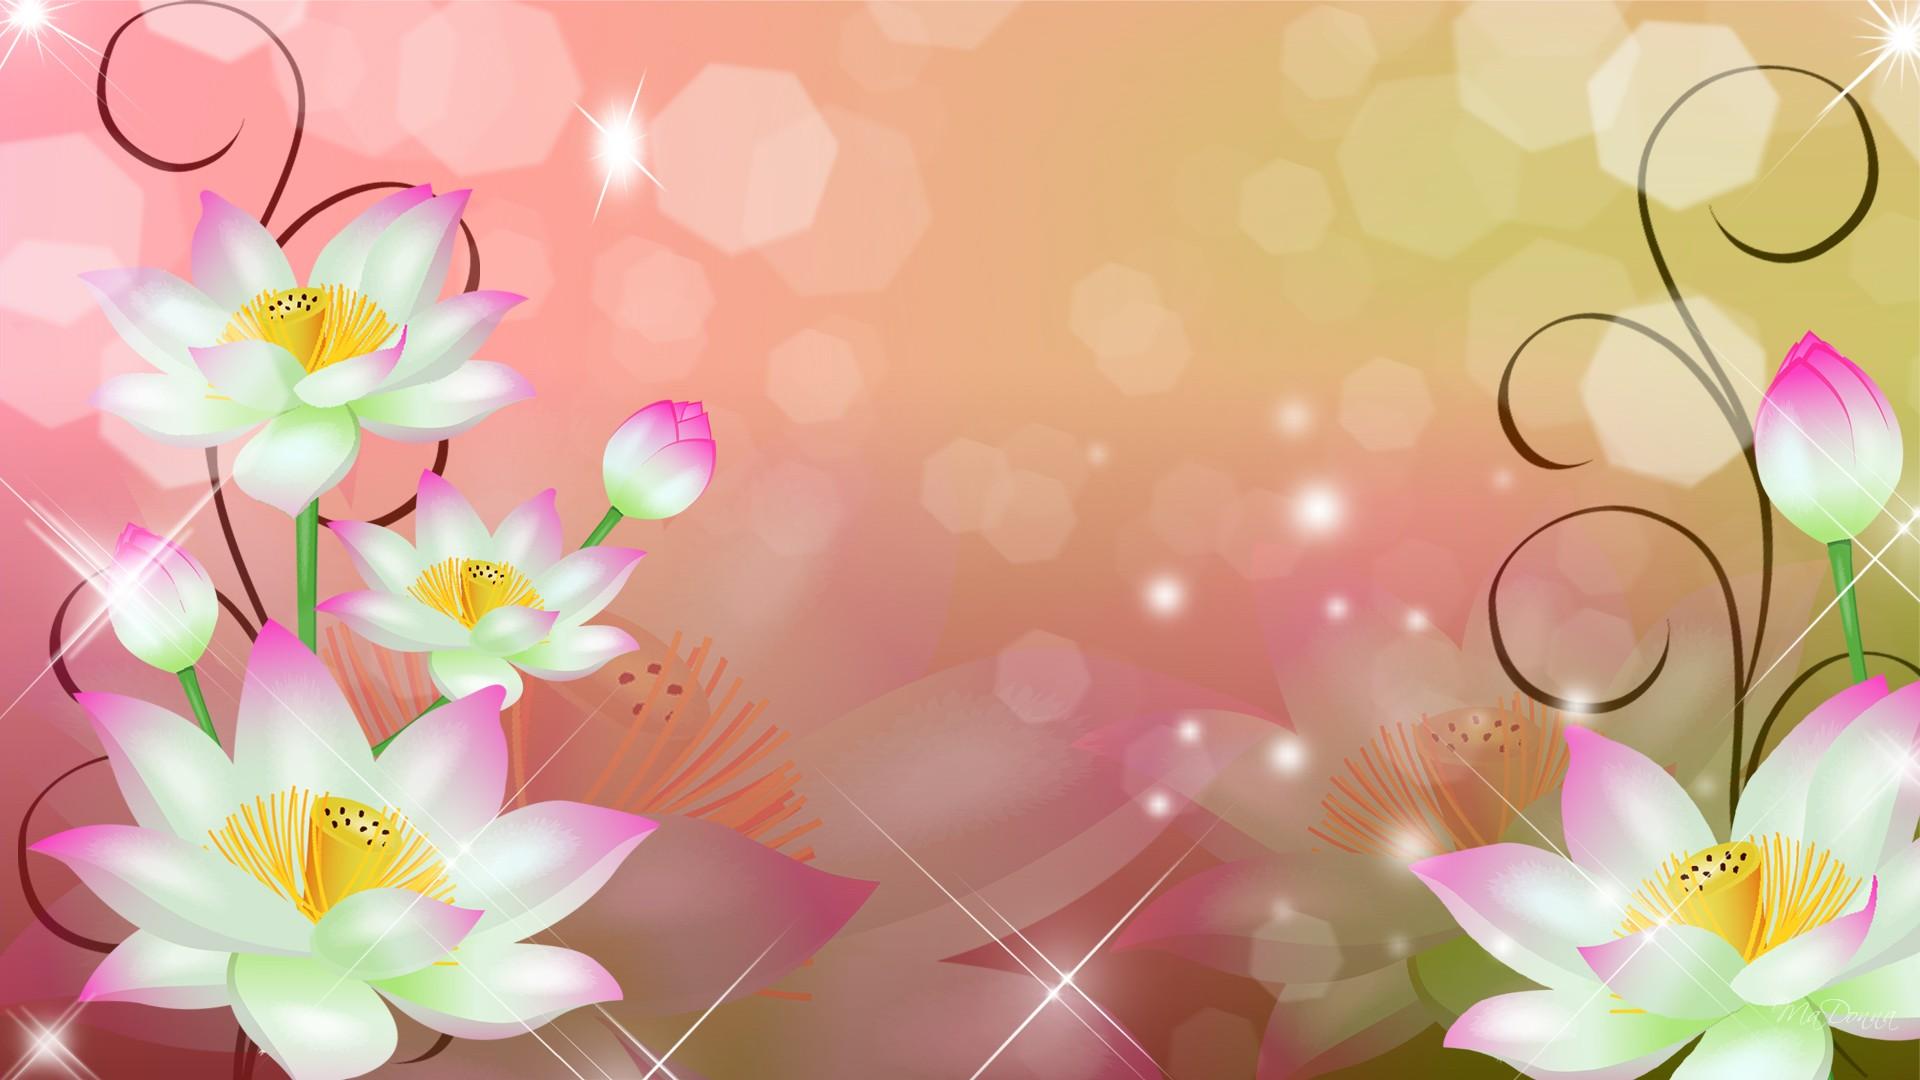 wallpapers and backgrounds,petal,pink,flower,spring,frangipani